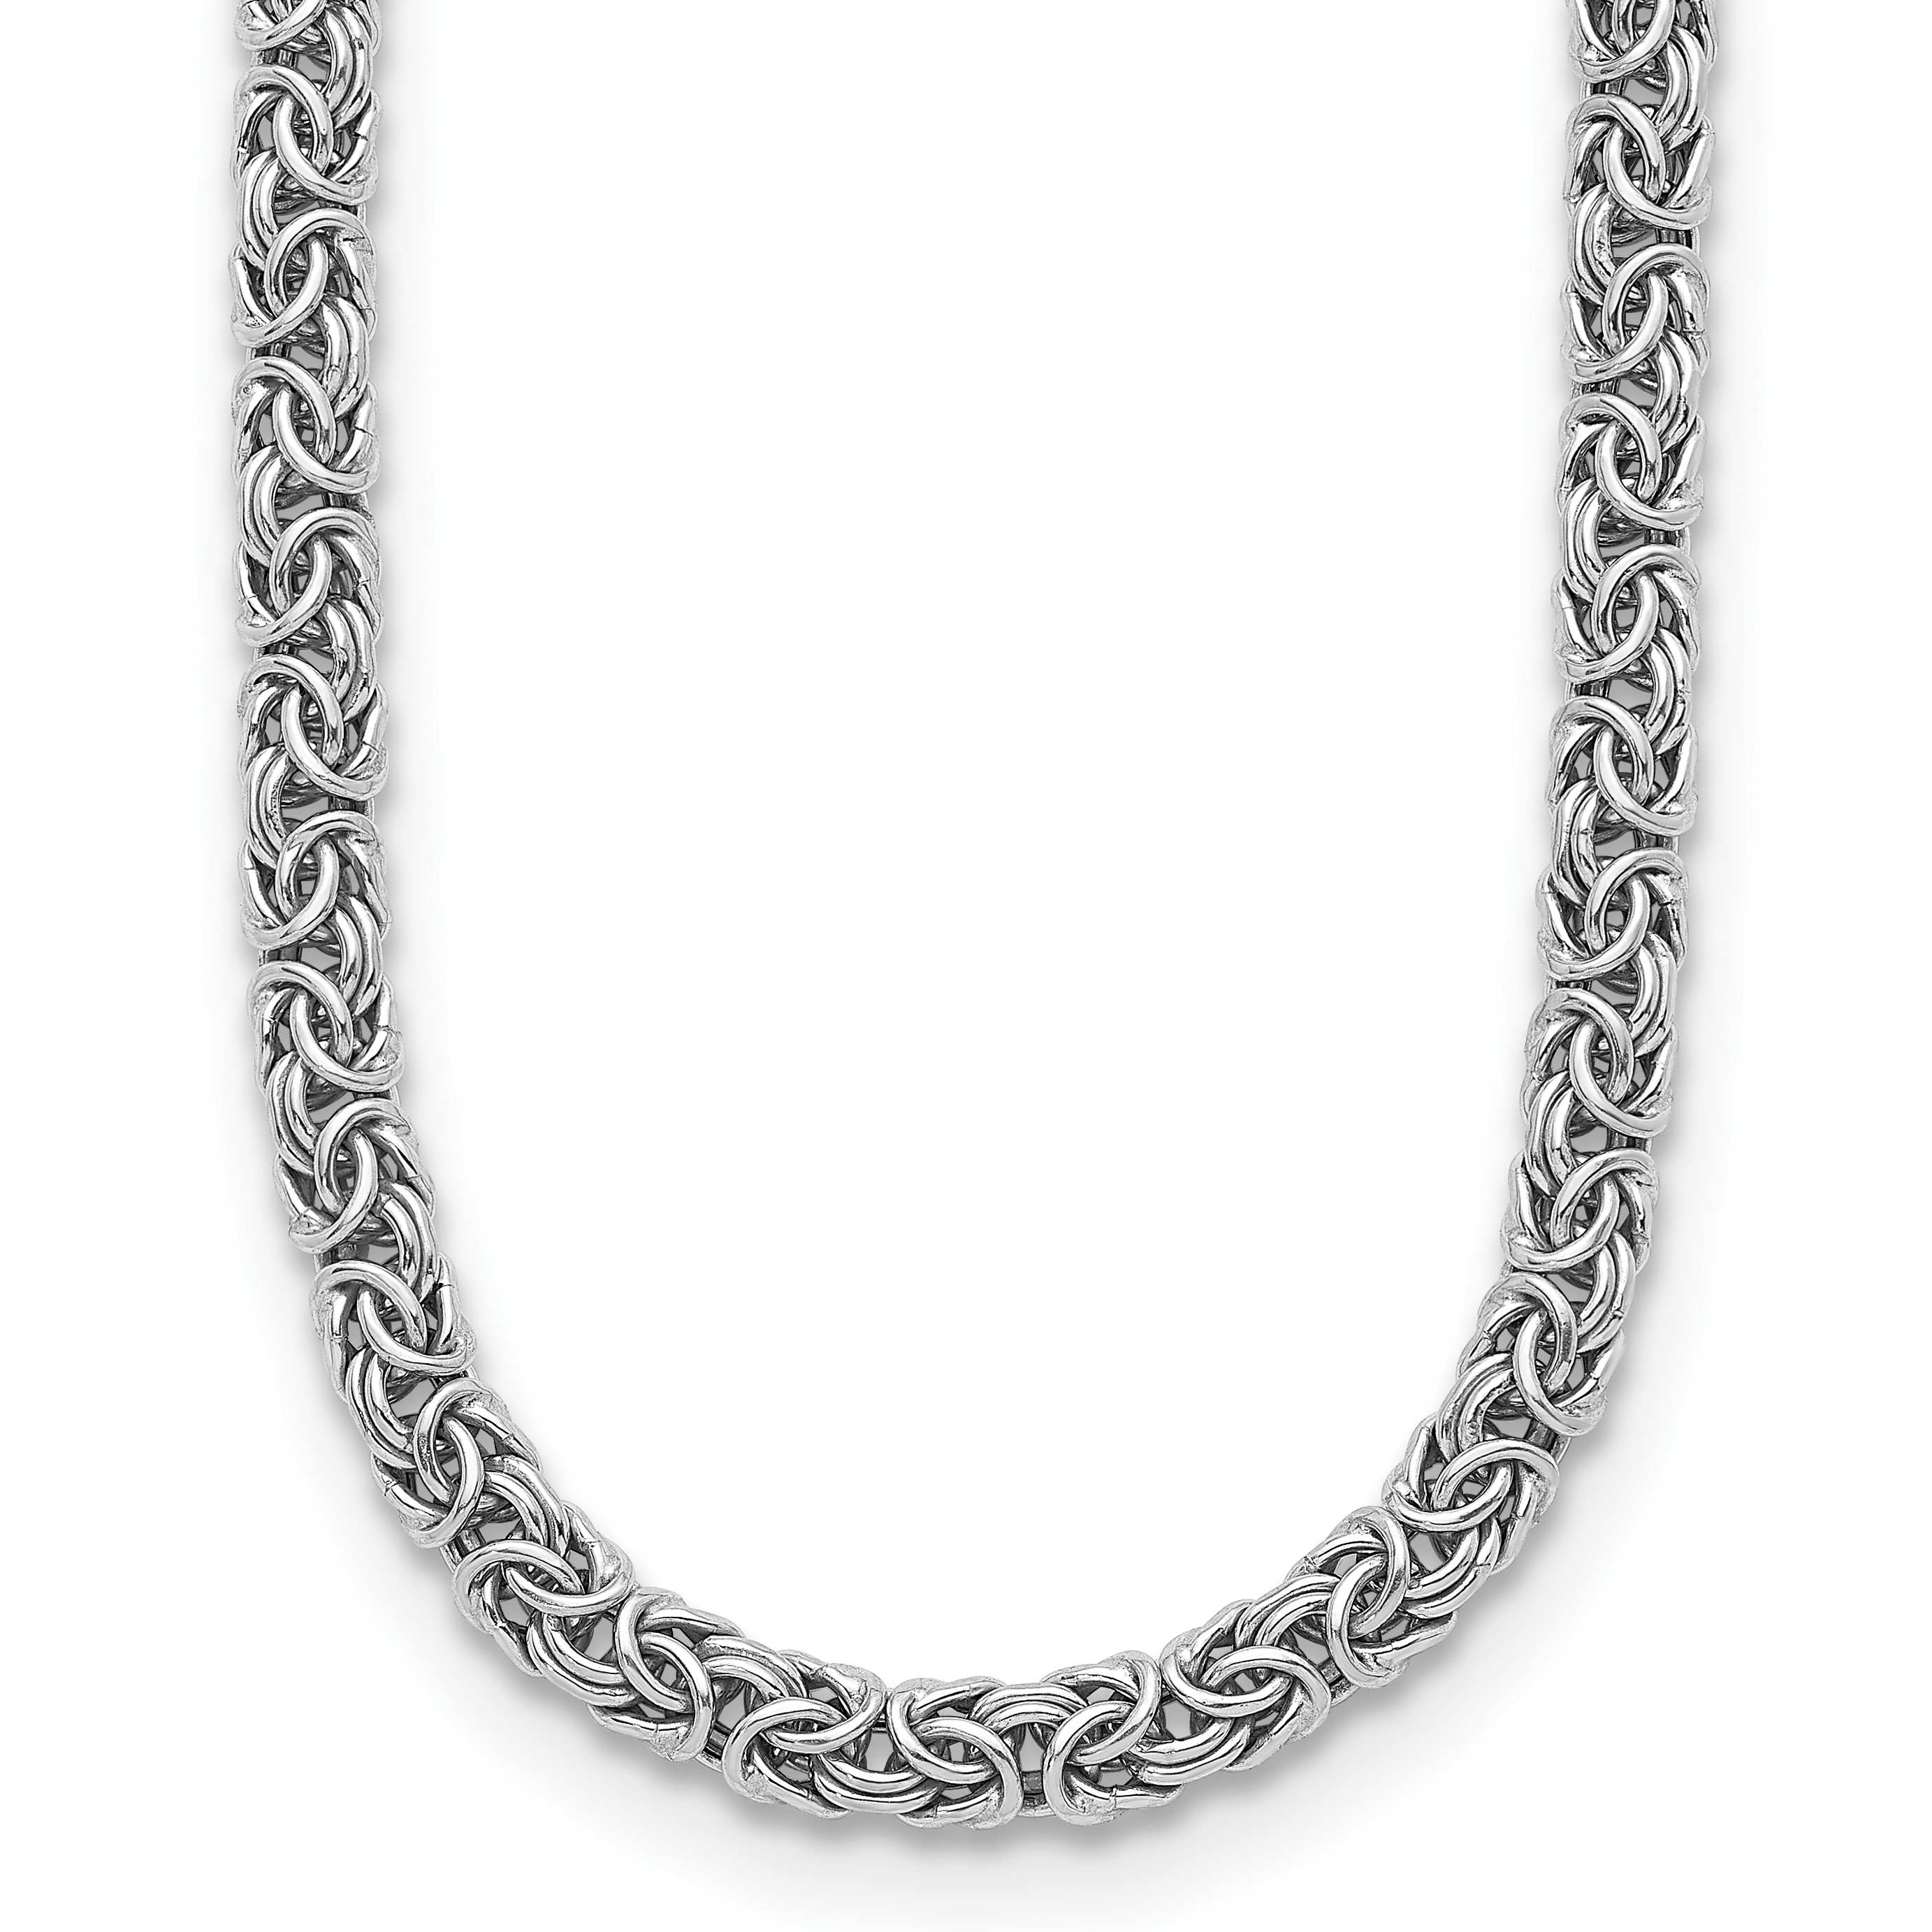 Jawa Jewelers 10K Yellow Gold Men Women's 5MM Hollow Byzantine Chain  Lobster Clasp, 20 to 28 Inches (20) | Amazon.com